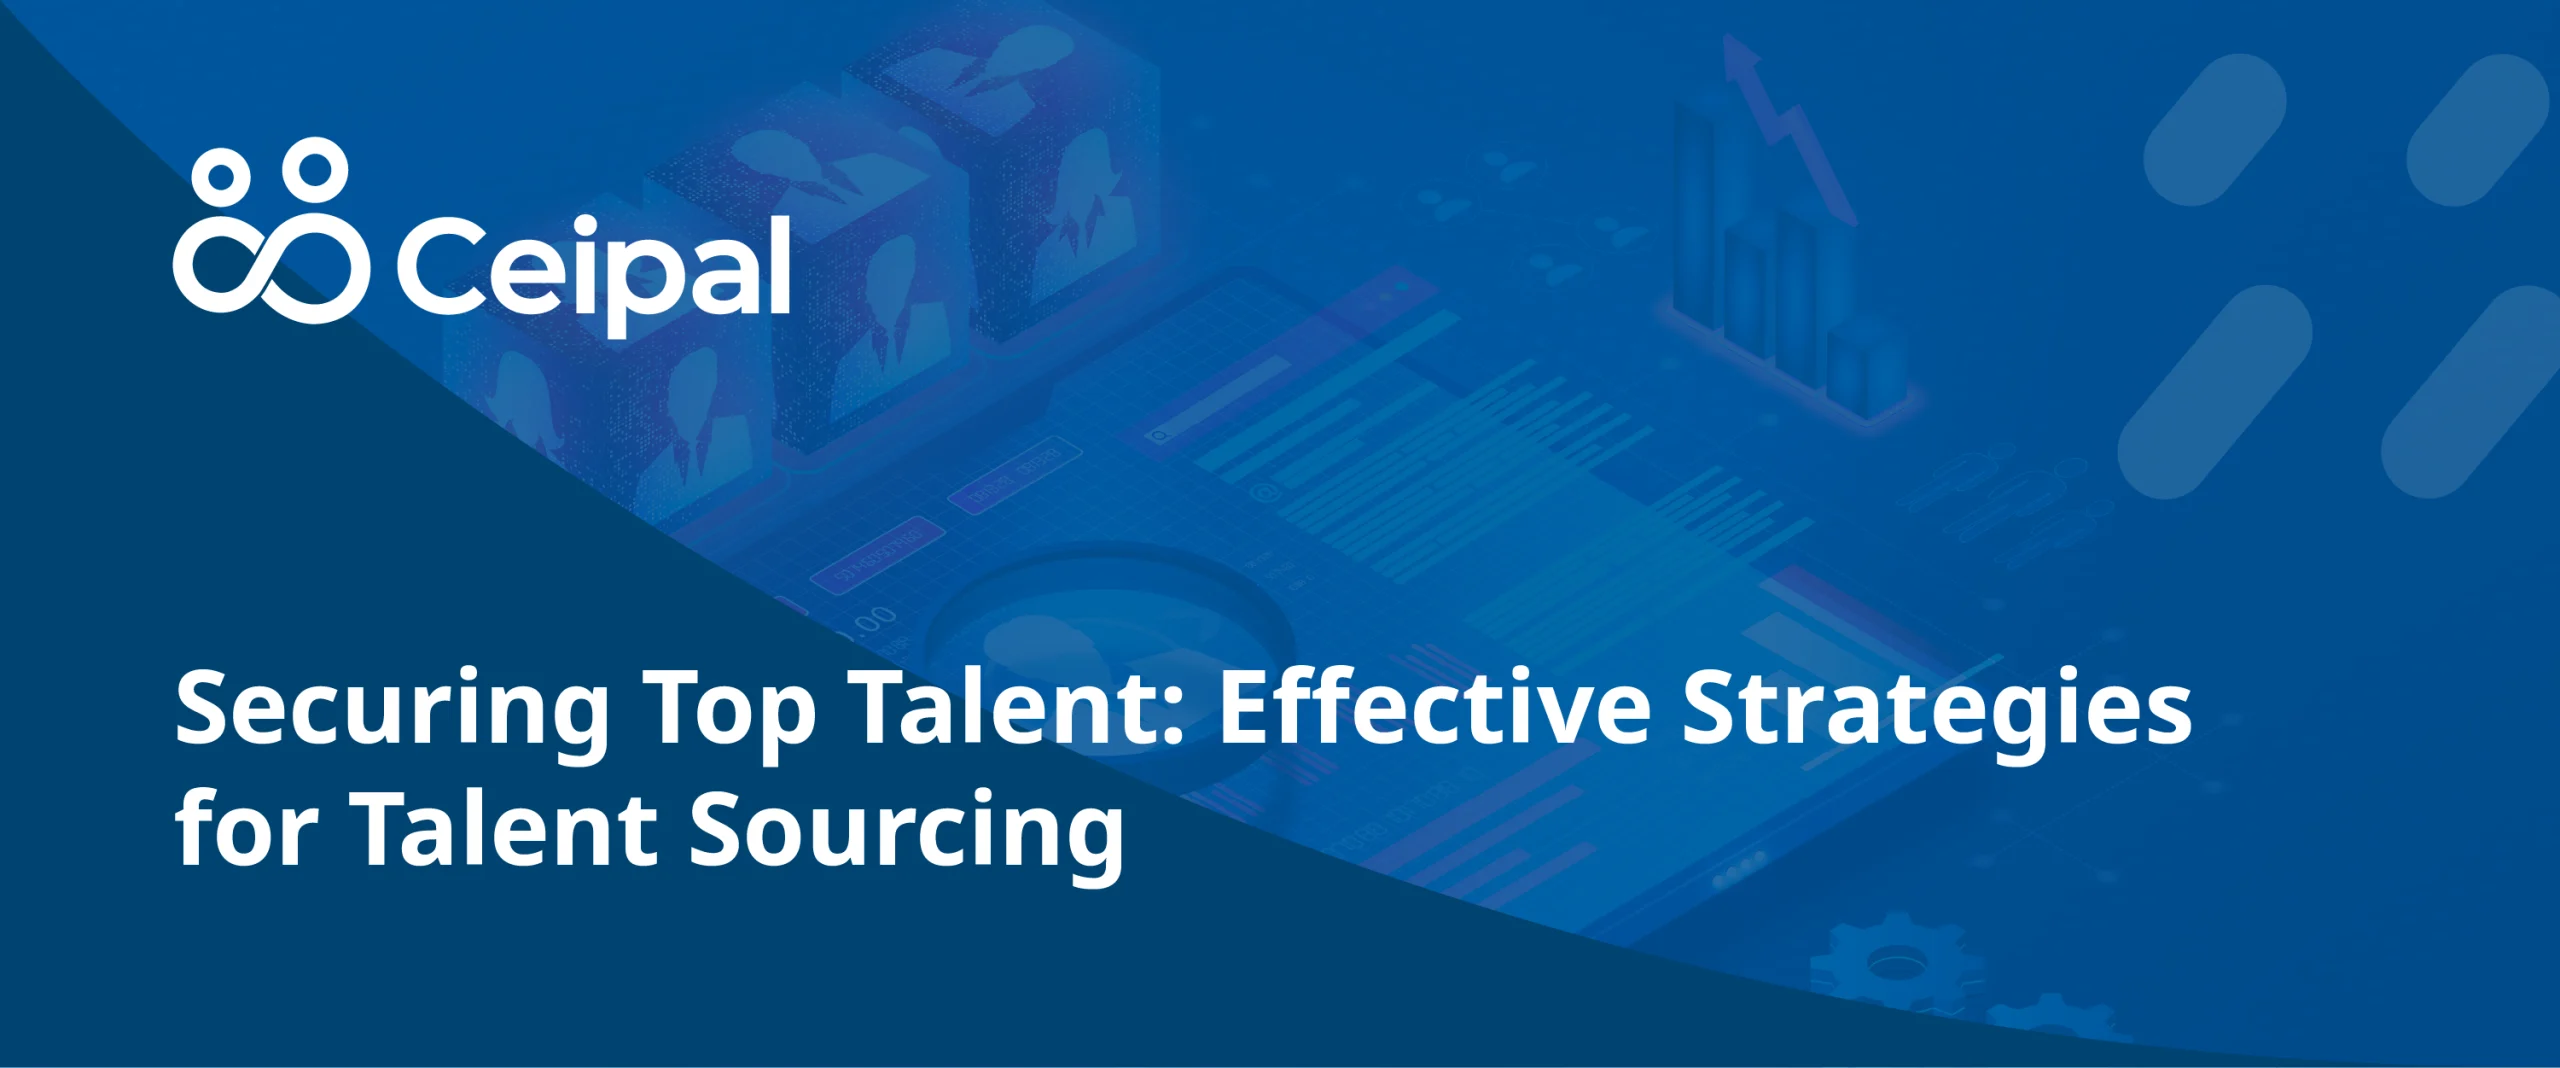 Securing Top Talent: Effective Strategies for Talent Sourcing